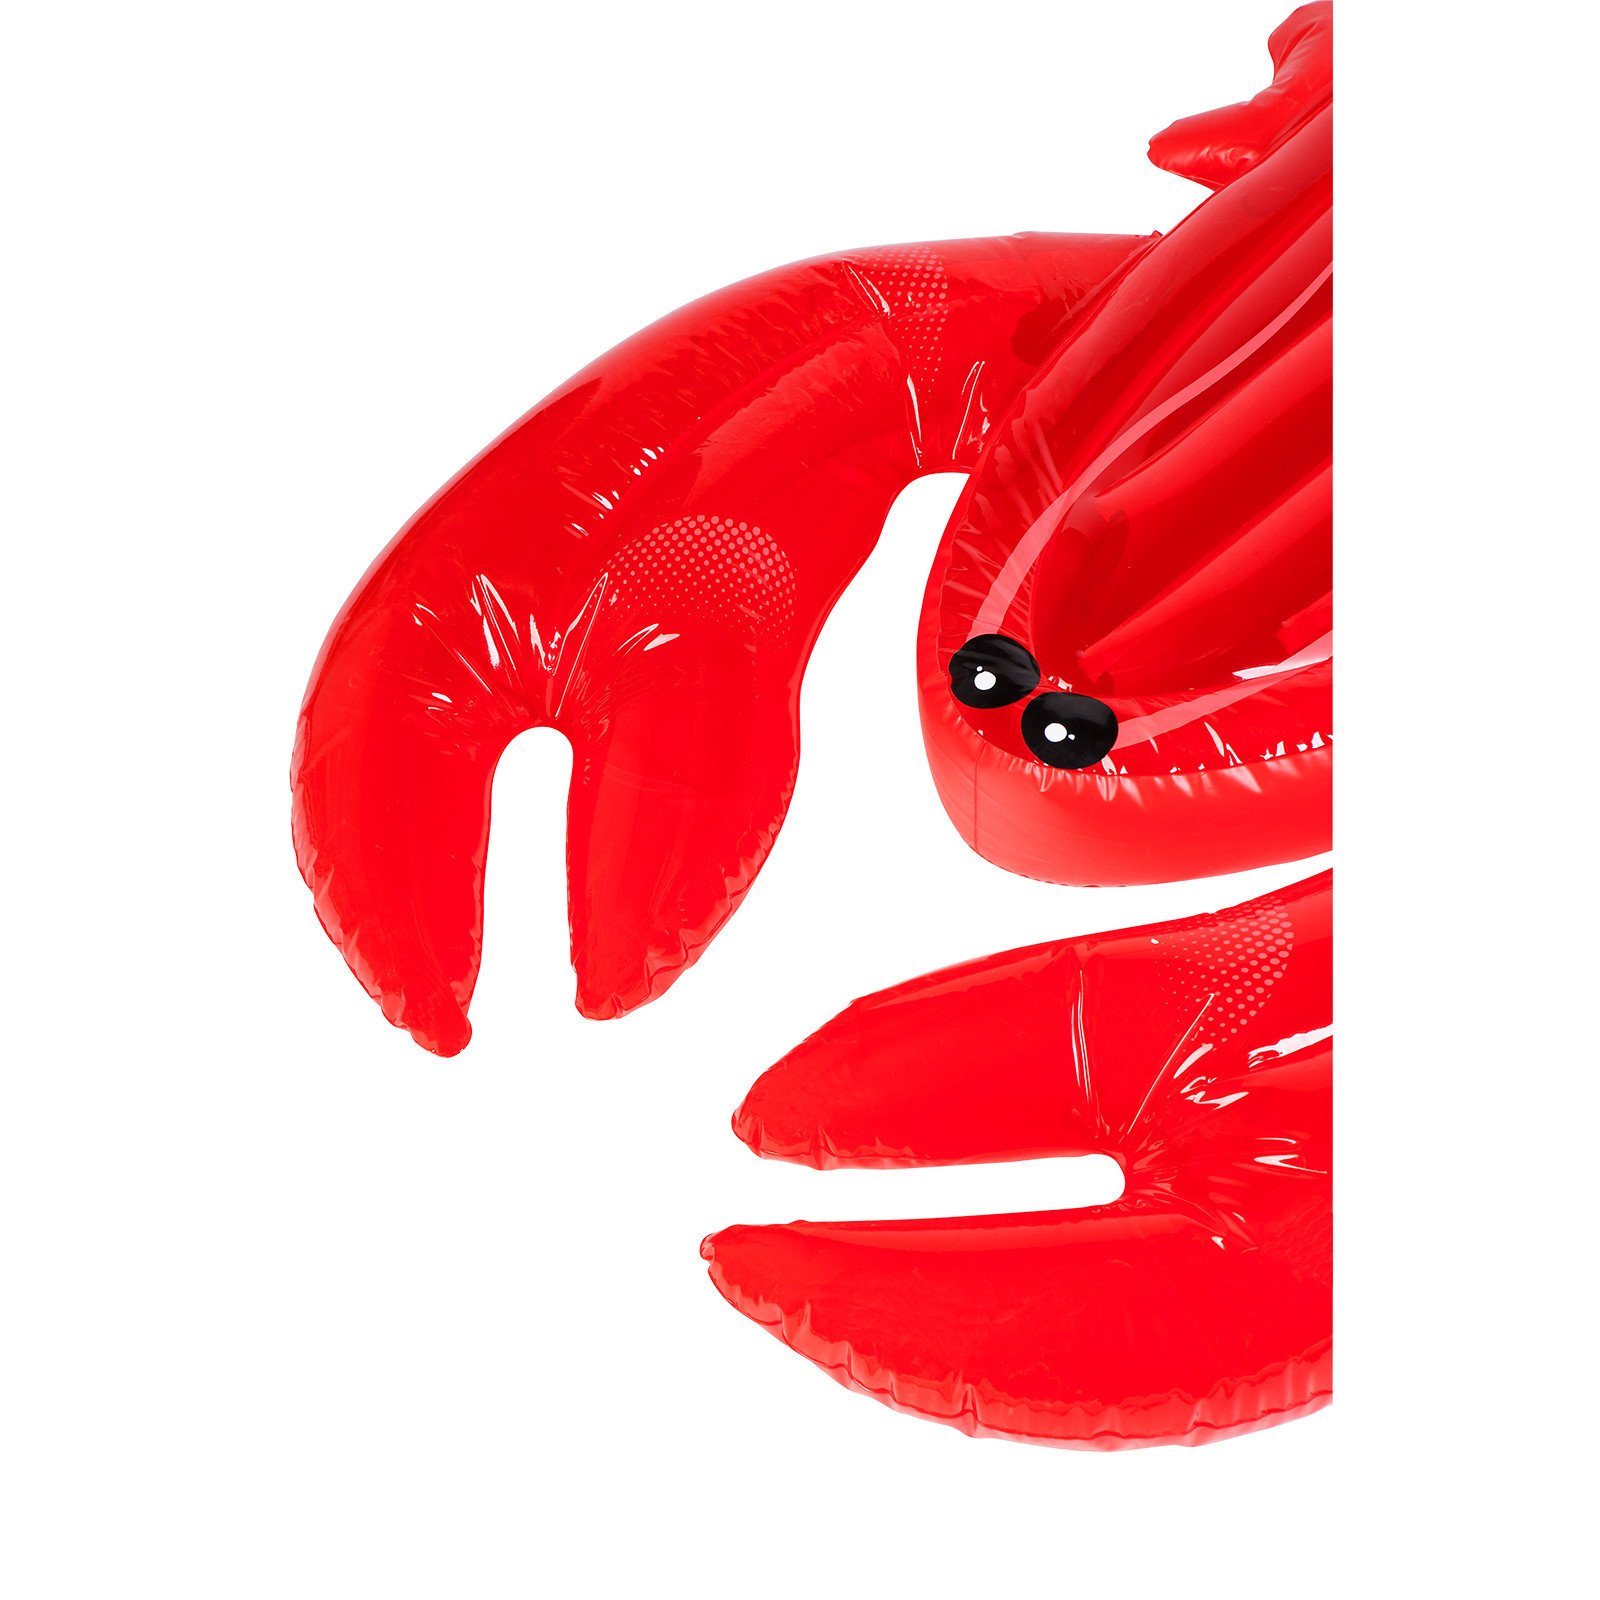 Lobster-shaped Inflatable Water Toy For Adults - Luxe Lobster - Sunnylife